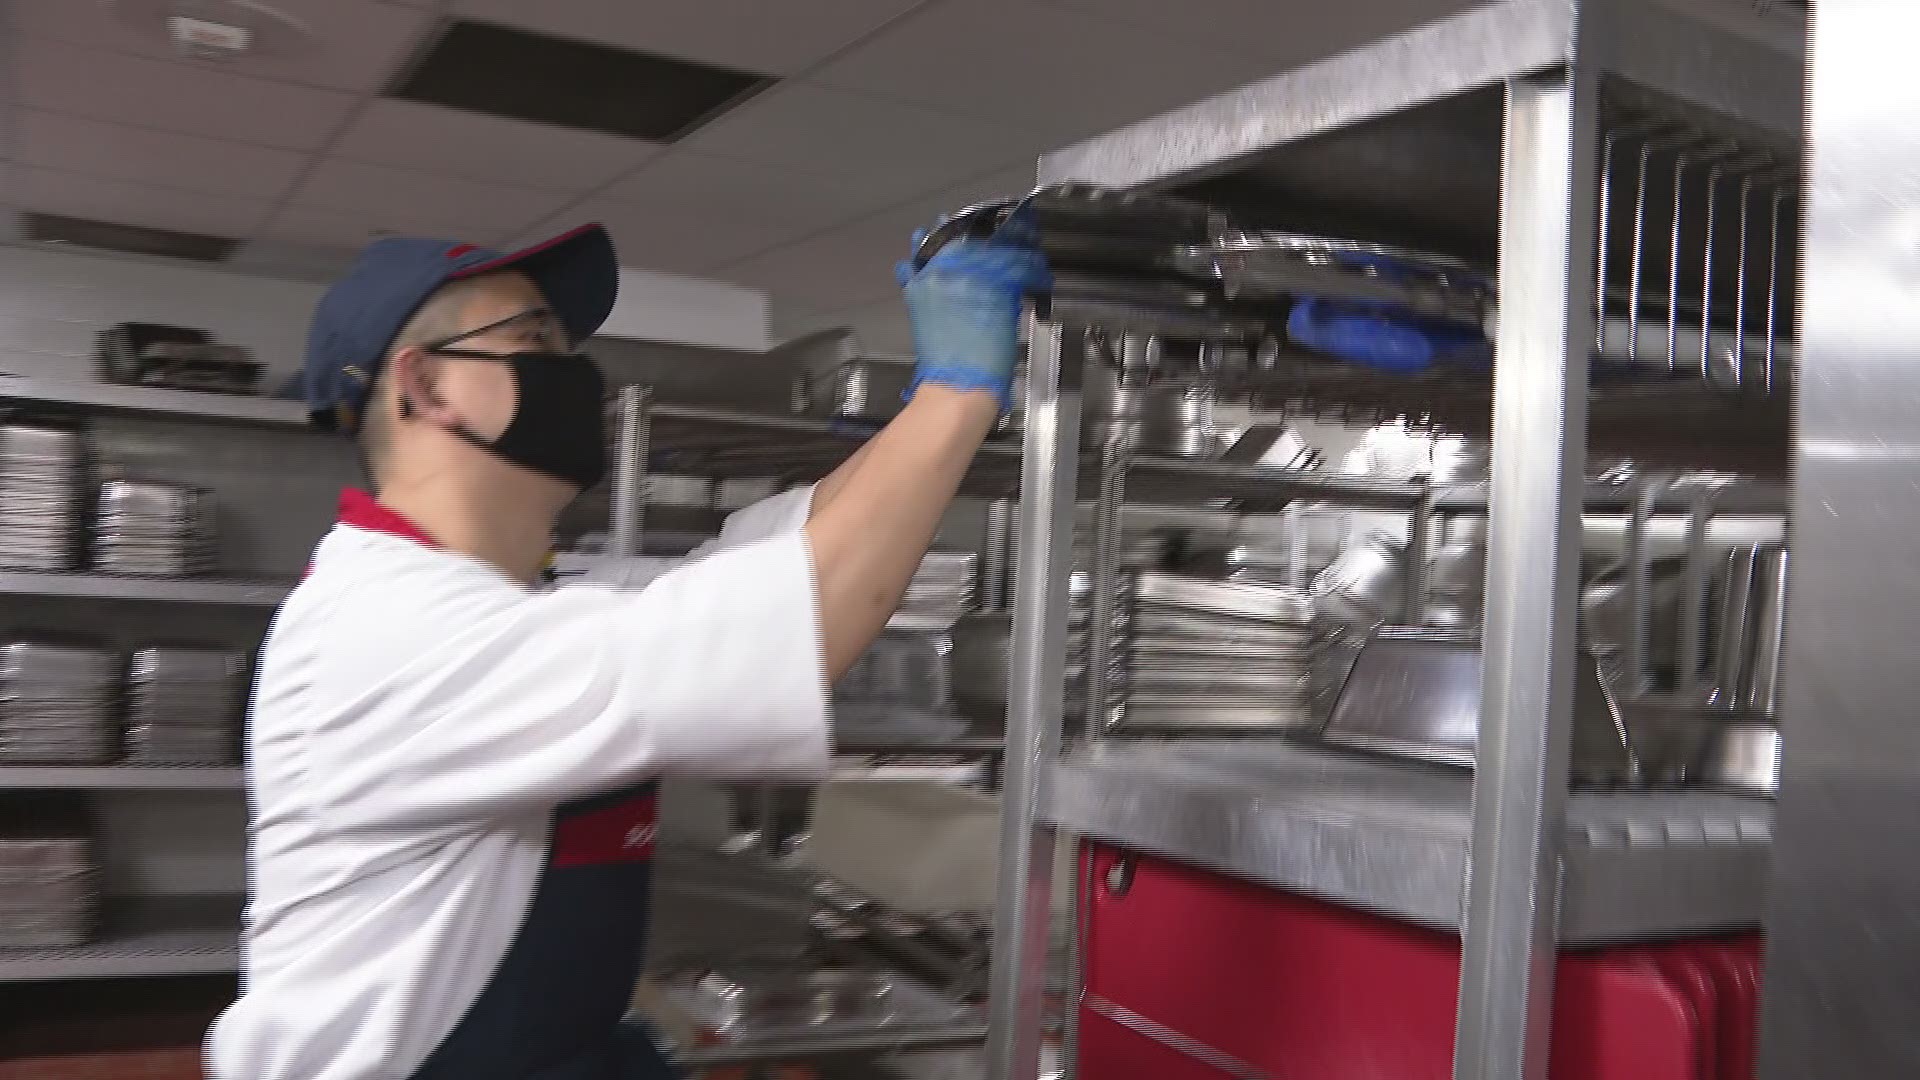 Blind and deaf cook Kevin Tong lands his dream job feeding thousands of Marines daily. His training helped him learn how to safely handle knives and more